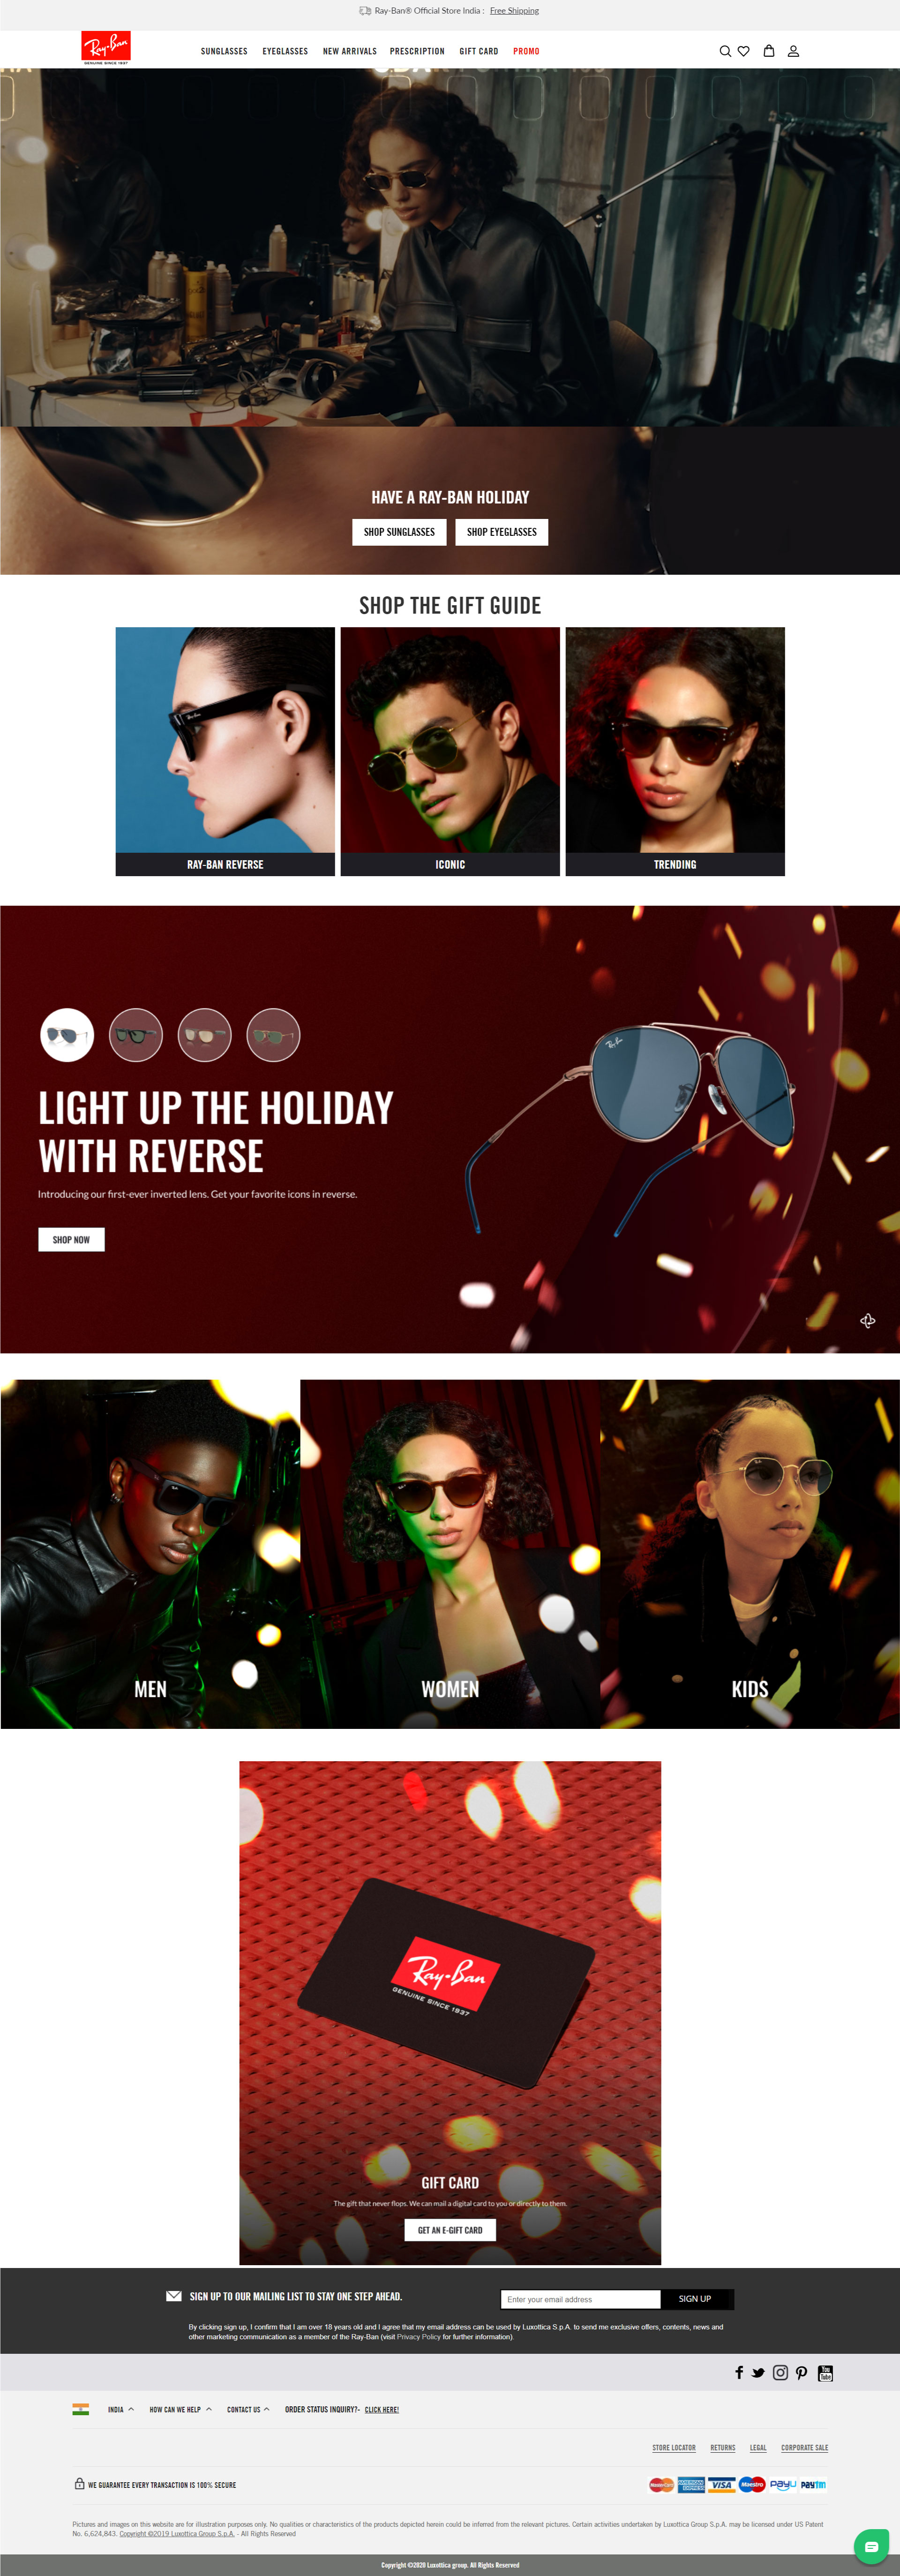 Ray-Ban’s landing page